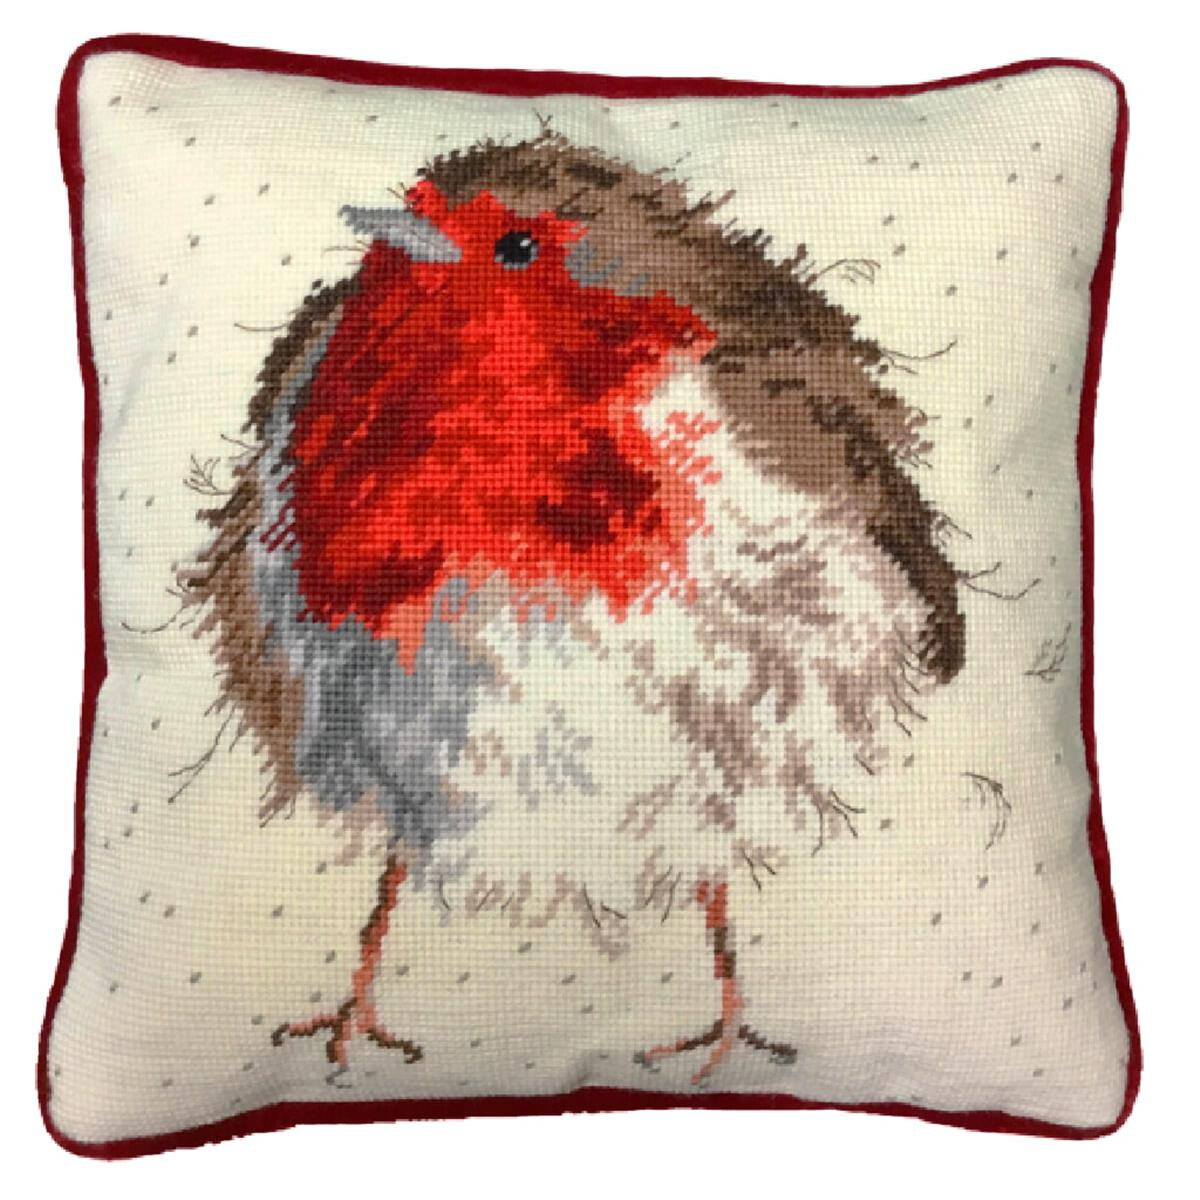 A square cushion with an embroidery pack design of a...